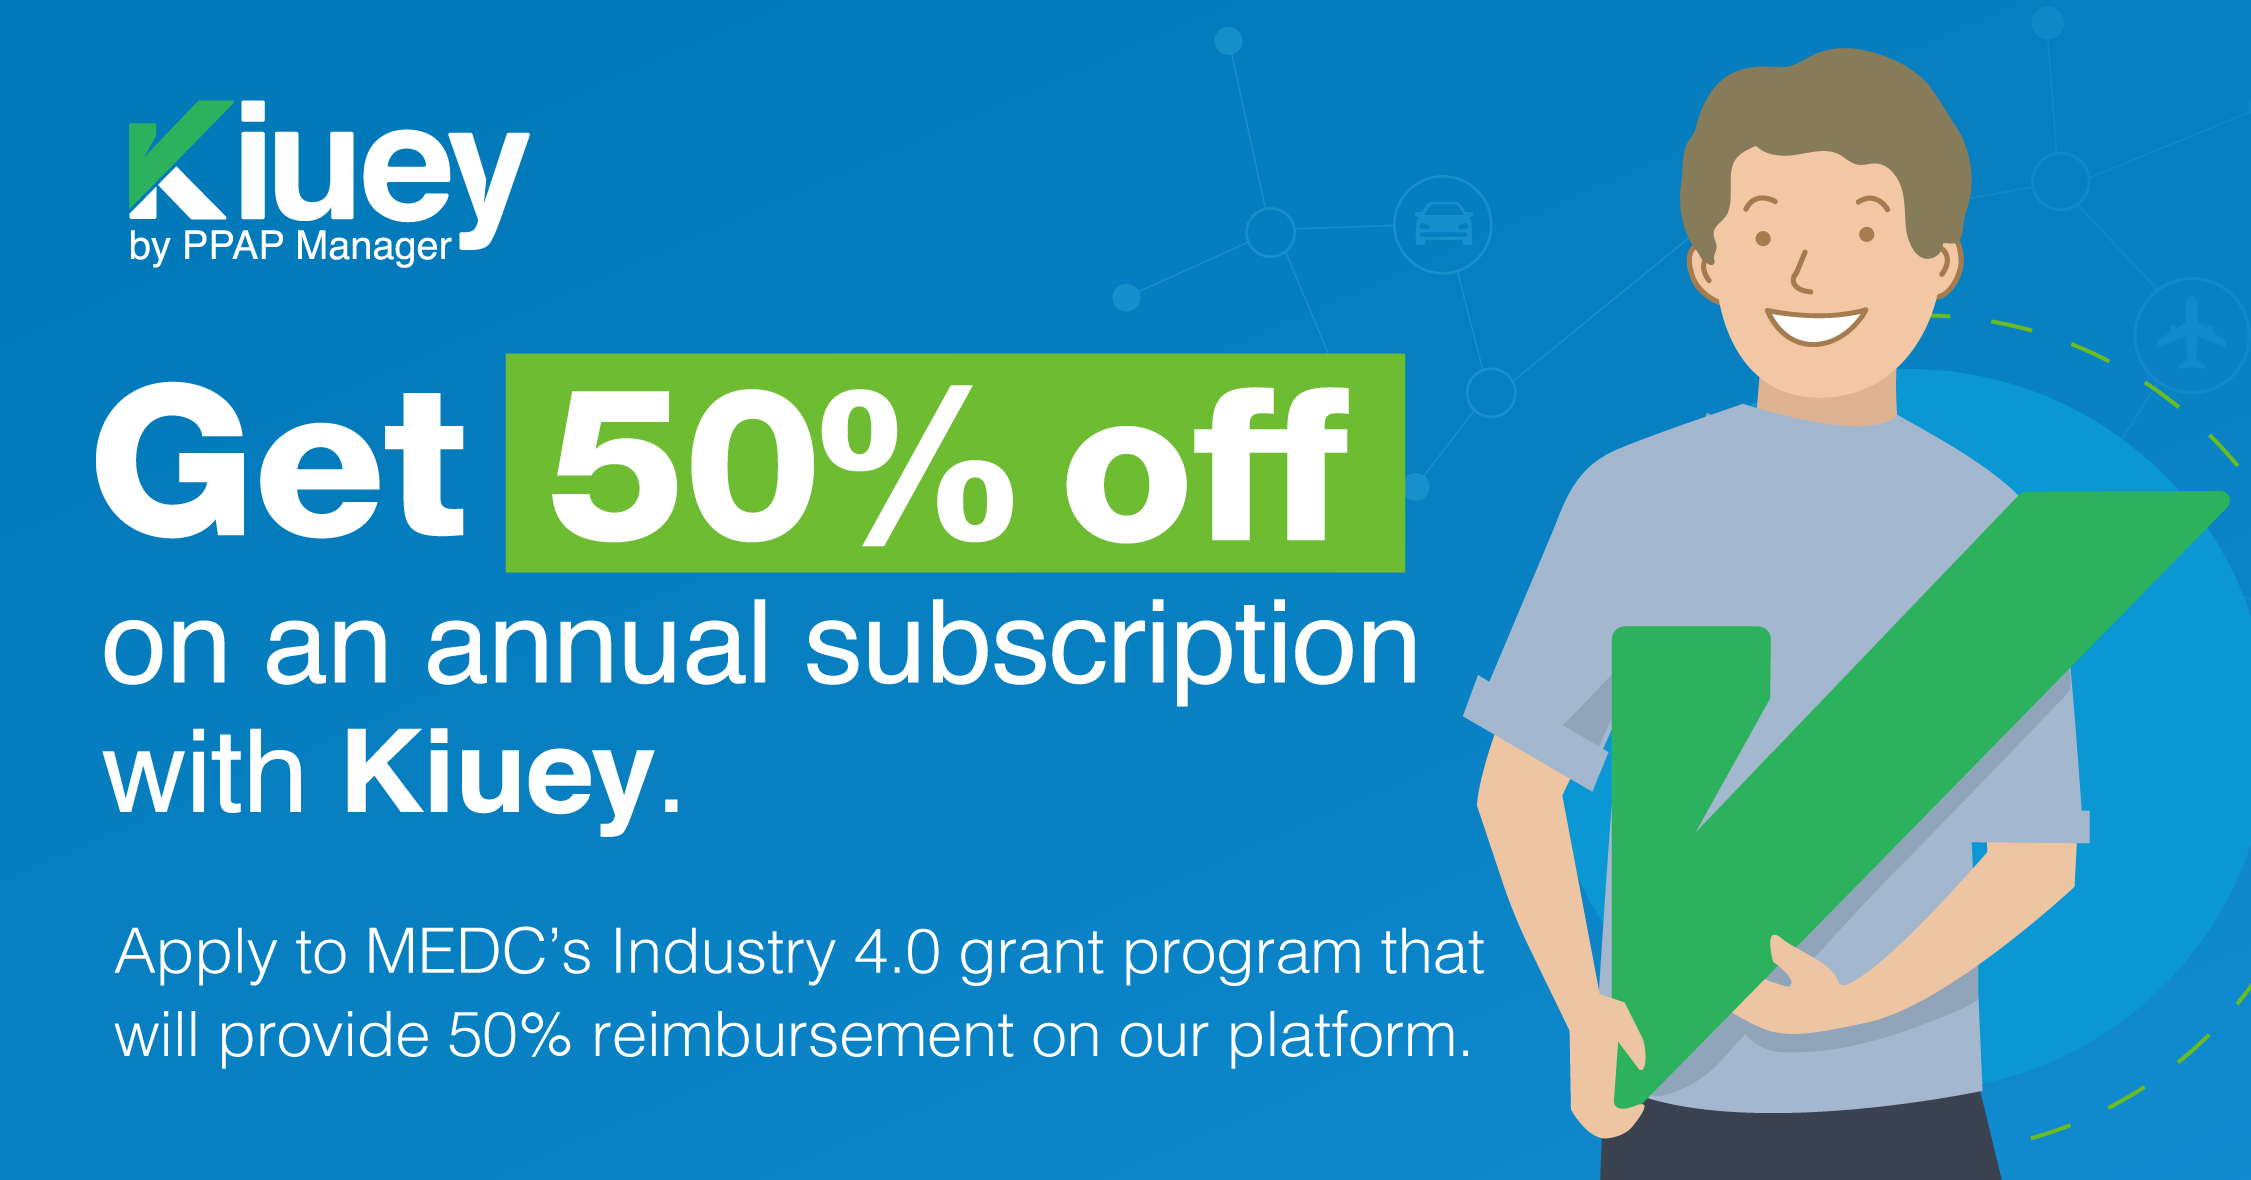 Your Kiuey annual subscription with 50% off!